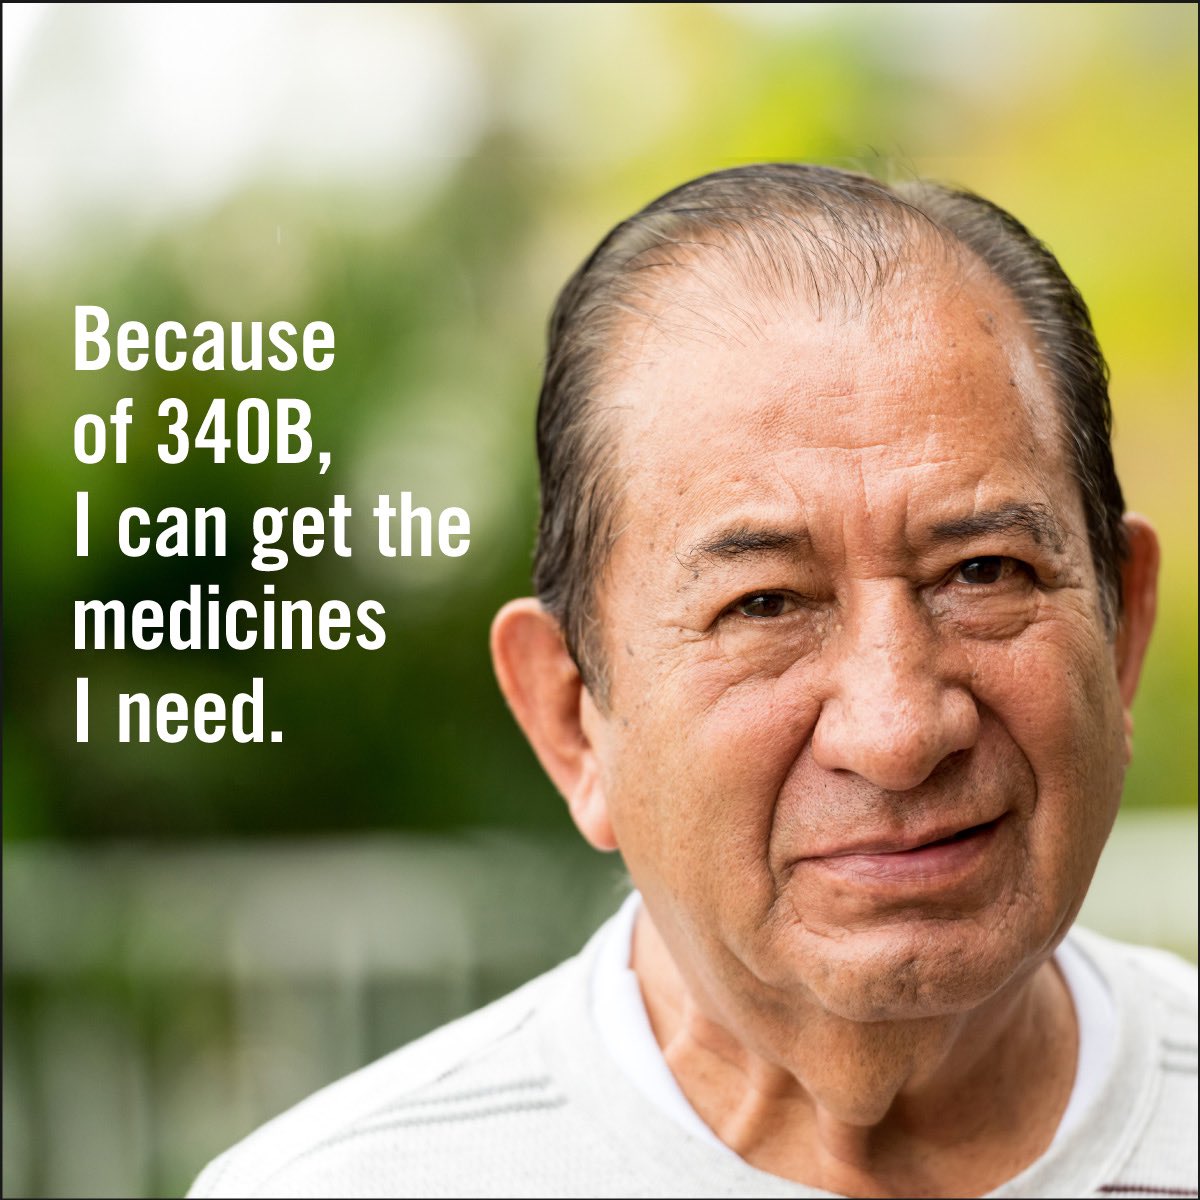 #340B is a lifeline for many patient communities, making essential medications more affordable for health care organizations and enabling them to expand crucial services for their patients. As federal lawmakers consider several bills that would affect 340B operations, it is